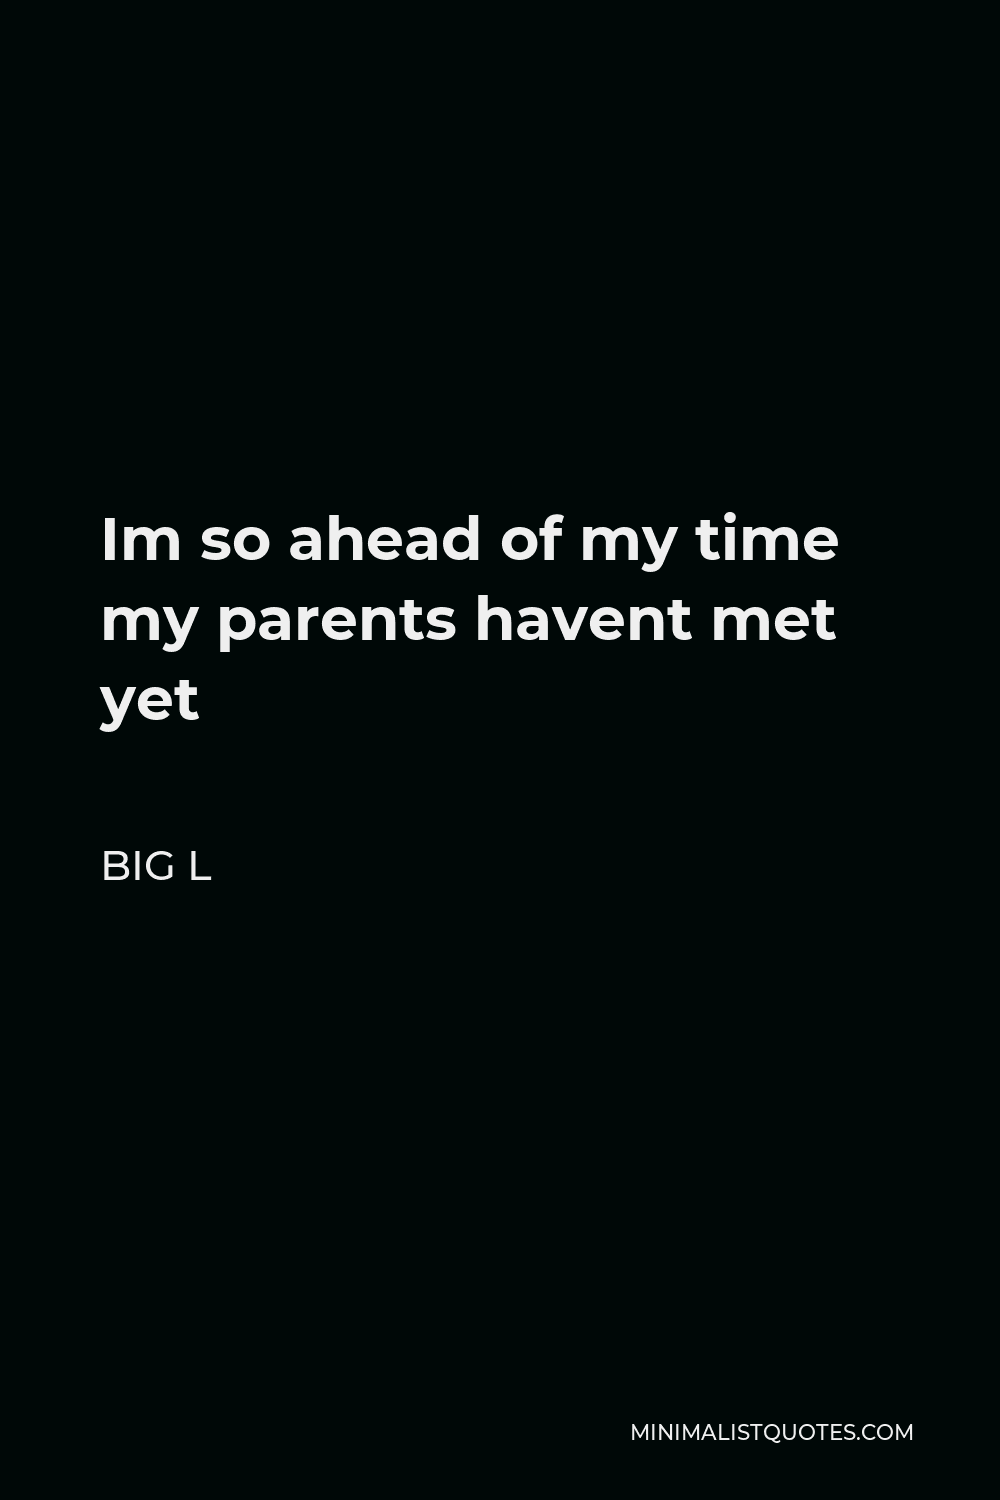 Big L Quote - Im so ahead of my time my parents havent met yet